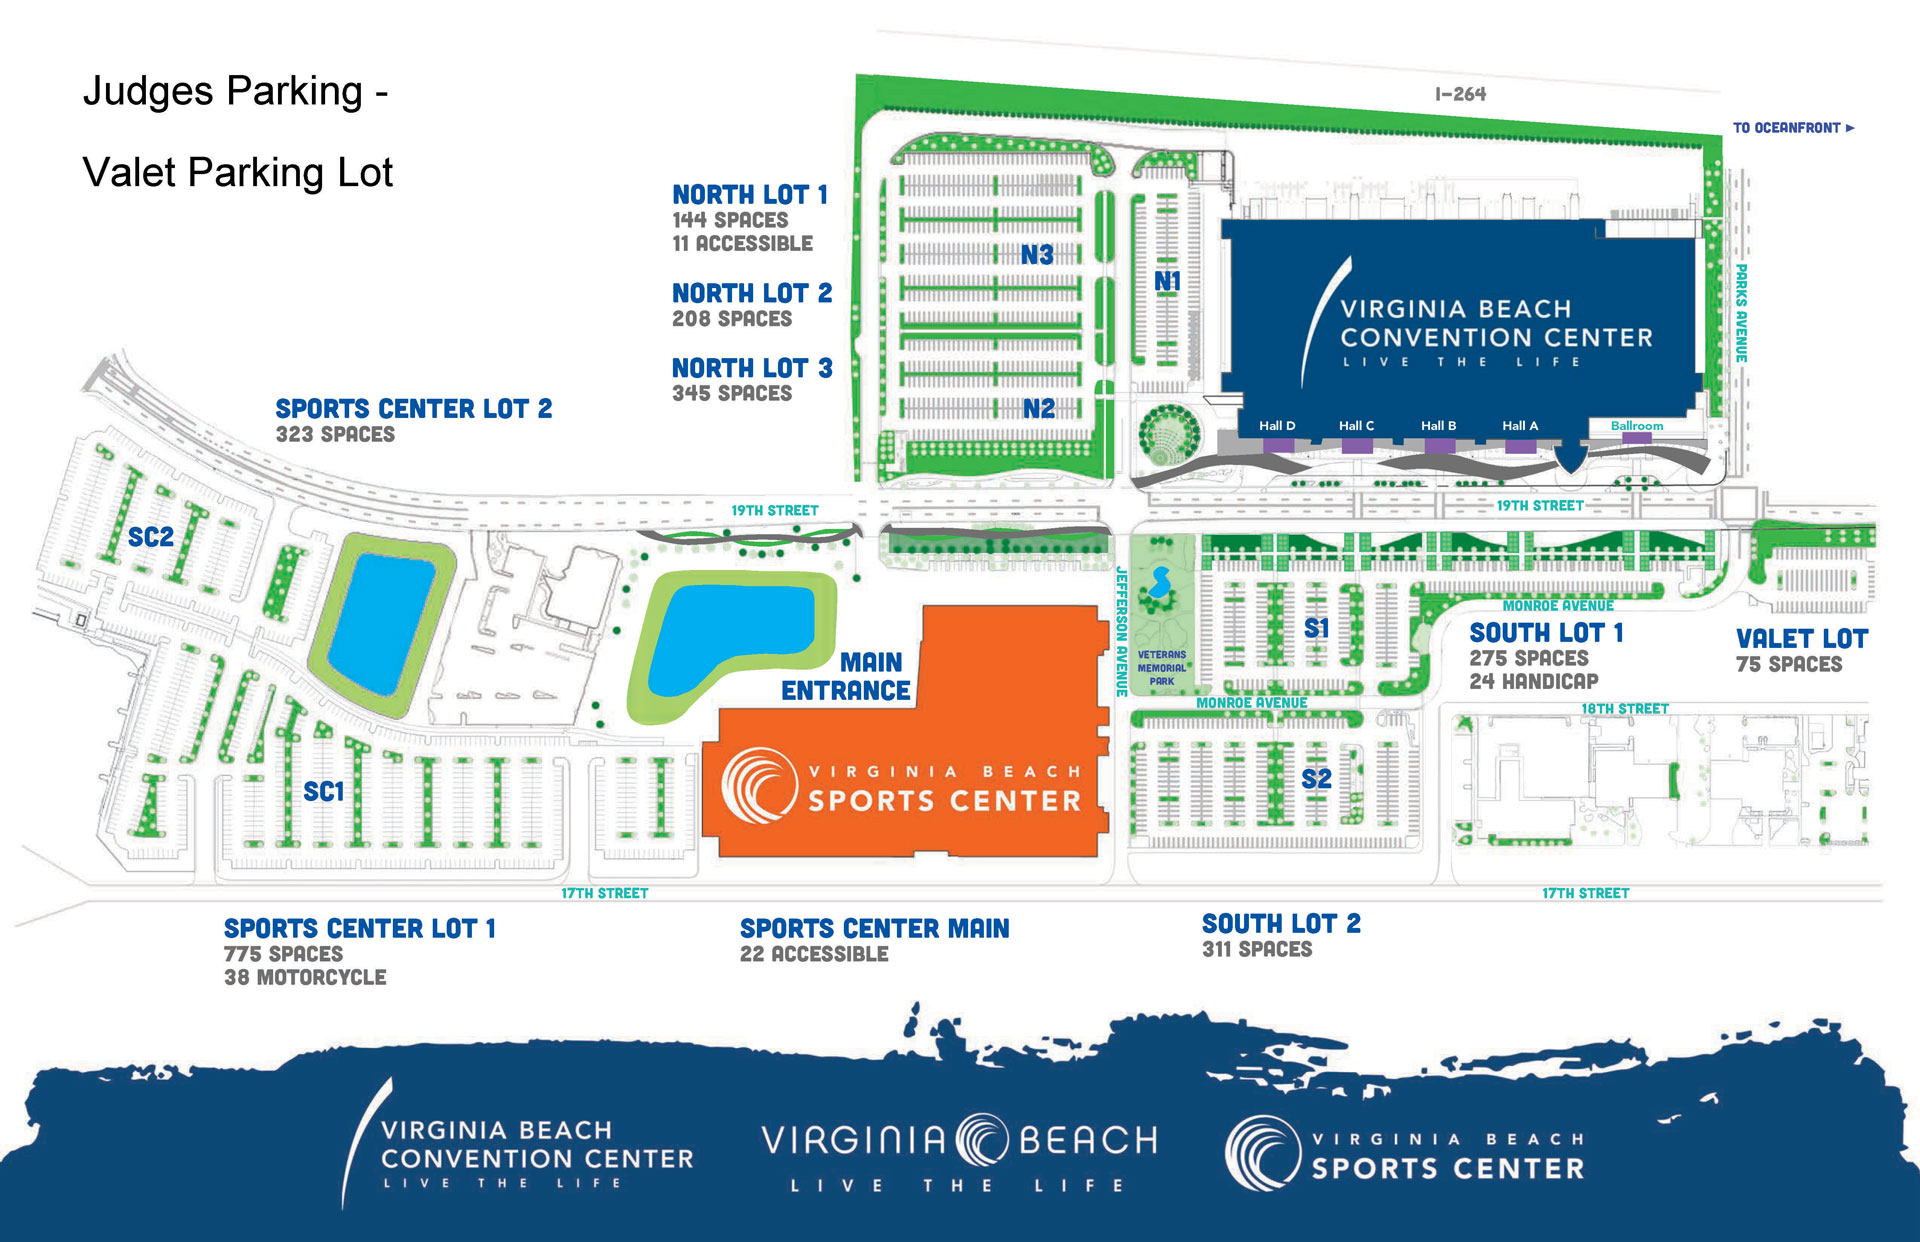 About and Directions to the Virginia Beach Convention Center